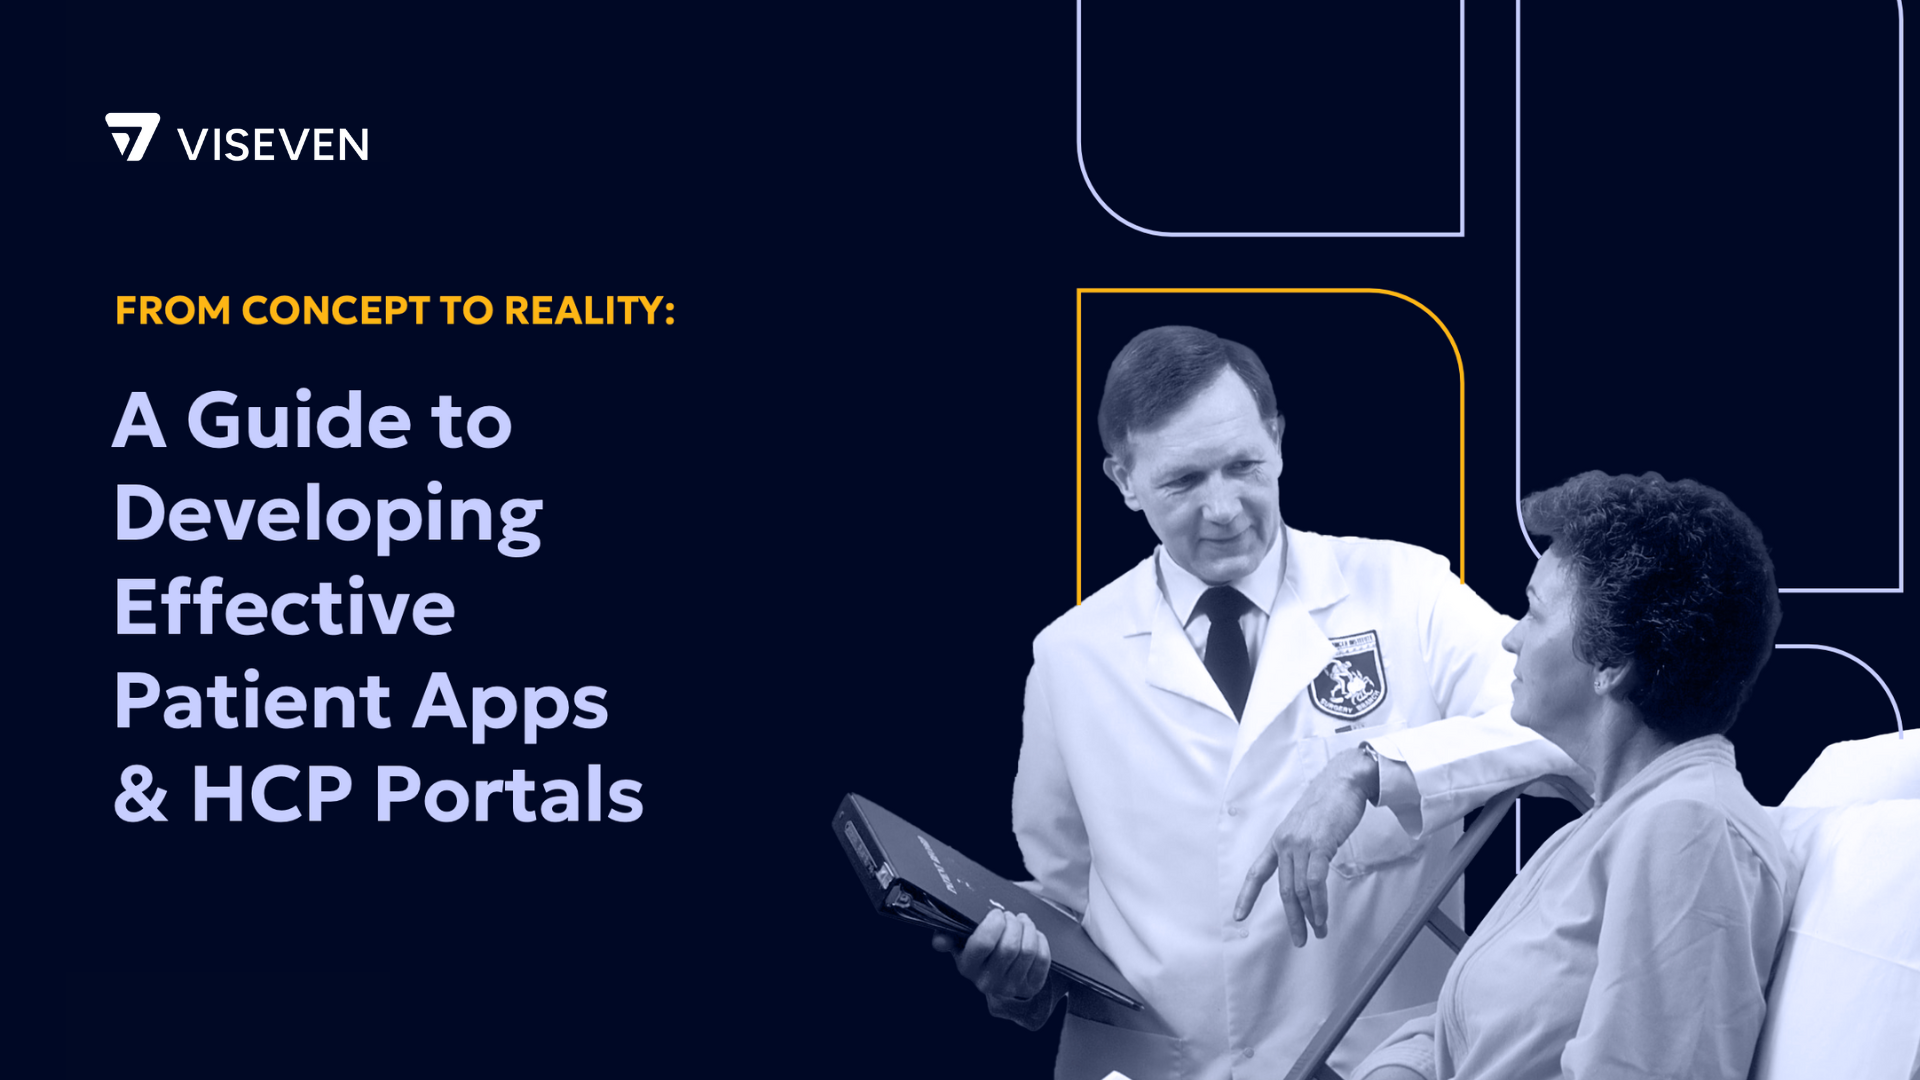 A Guide to Developing Effective Patient Apps & HCP Portals